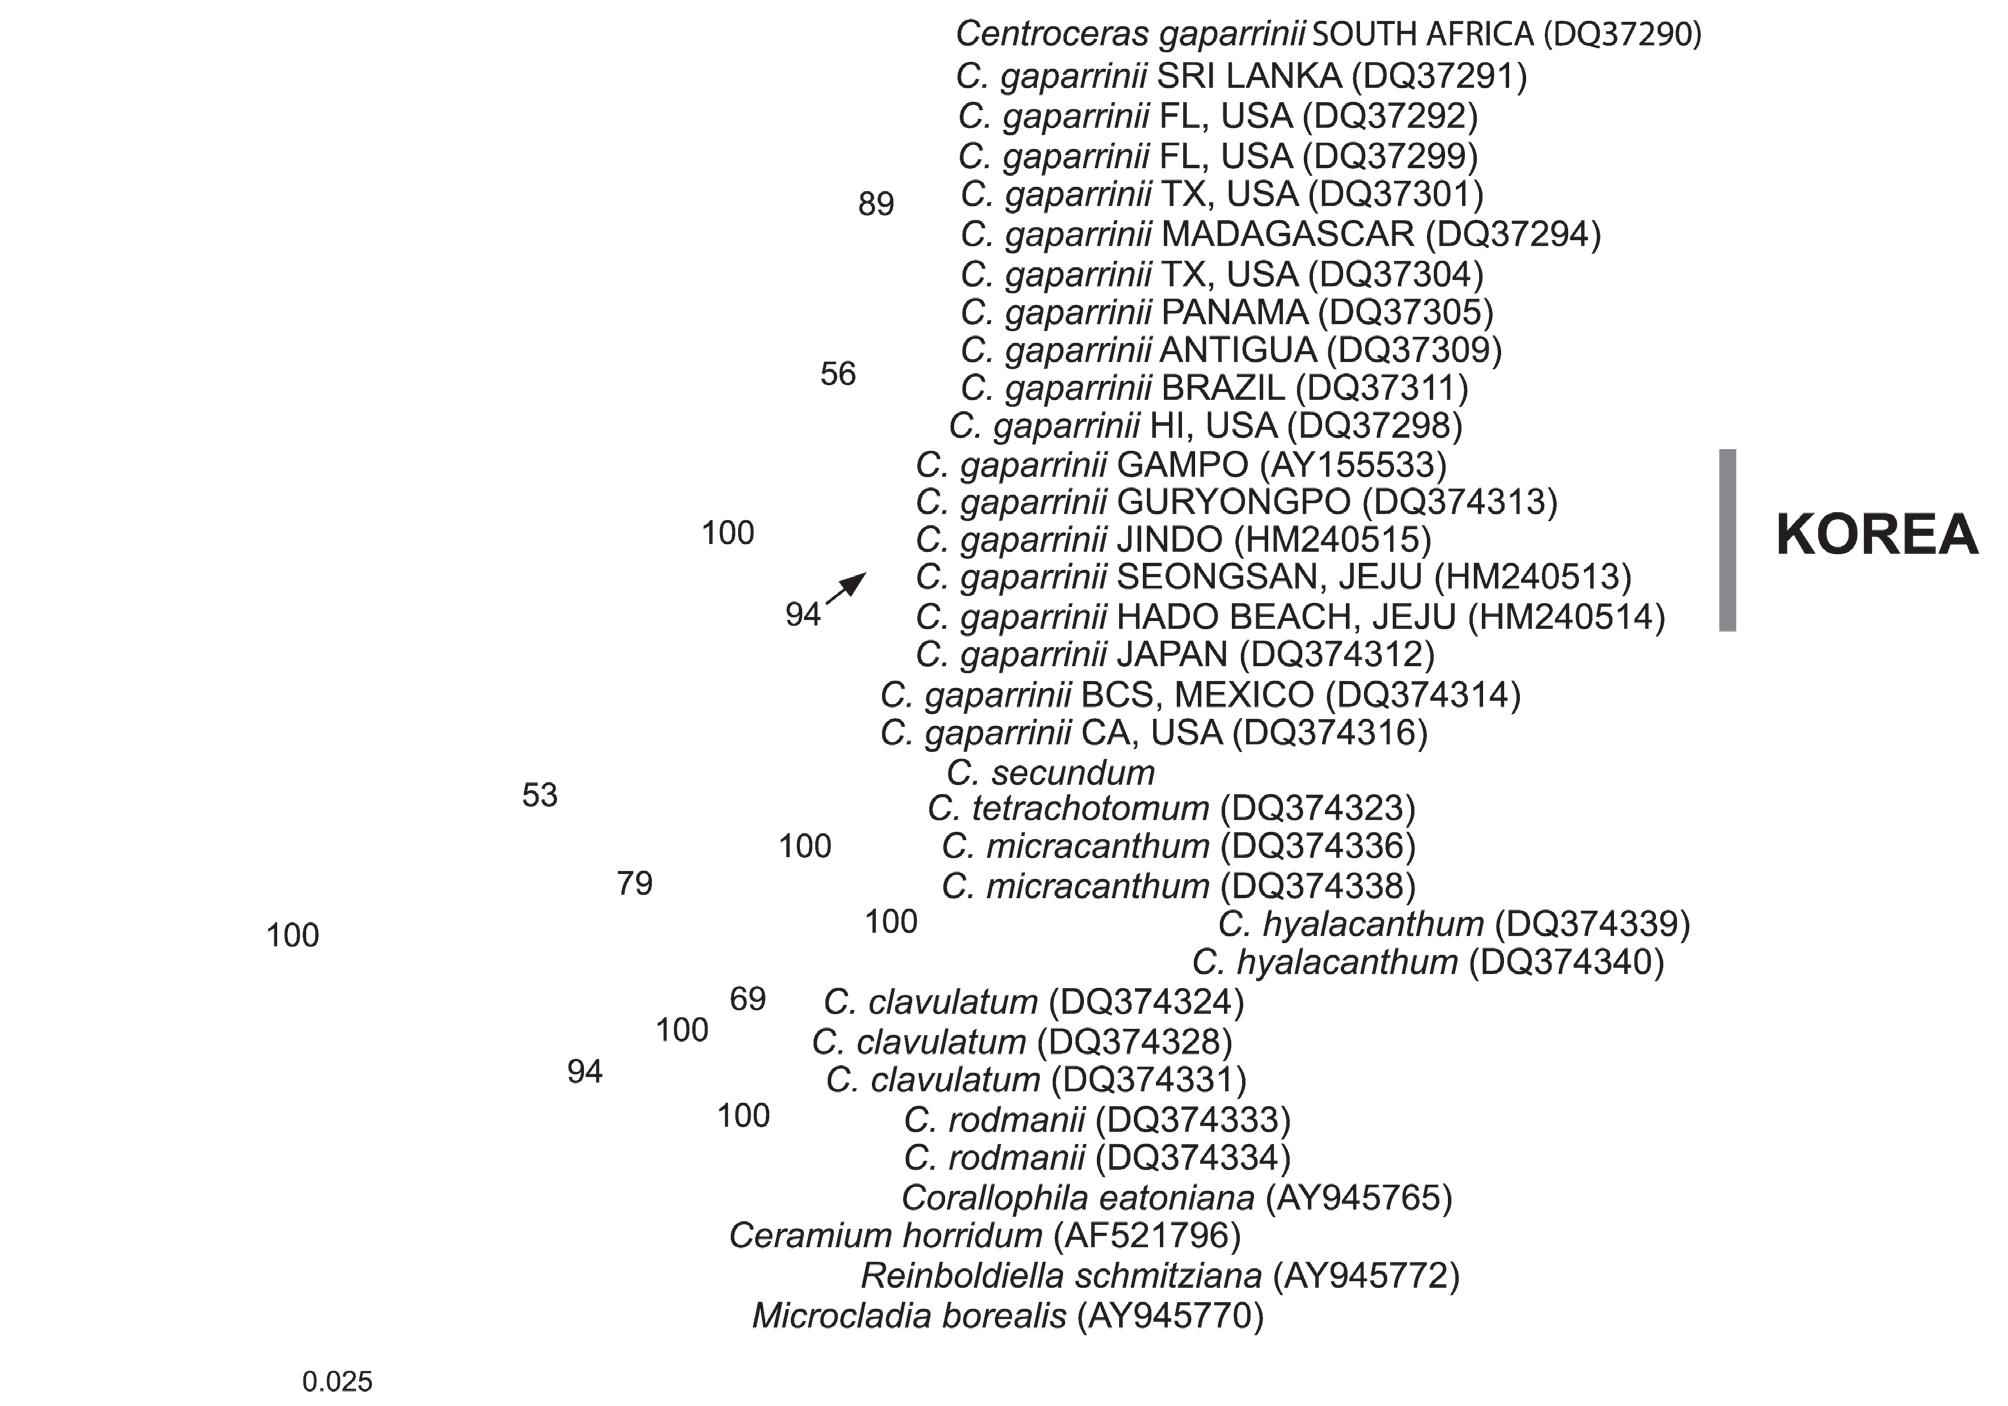 Phylogeny of the Centroceras based on the rbcL sequences inferred from Maximum Likelihood analyses using the General Time Reversible model (GTR) (Rodriguez et al. 1990) + G (Gamma distribution). The parameters were as follows: assumed nucleotide frequencies A = 0.3235, C = 0.1361, G = 0.2043, T = 0.3361; substitution rate matrix with A-C substitutions = 1.3647, A-G = 3.9246, A-T = 2.3629, C-G = 0.9594, C-T = 18.2459, G-T = 1.0000; proportion of sites assumed to be invariable = 0 and rates for variable sites assumed to follow a gamma distribution with shape parameter = 0.1547. Bootstrap proportion values (> 50%) for maximum likelihood (500 replicates).